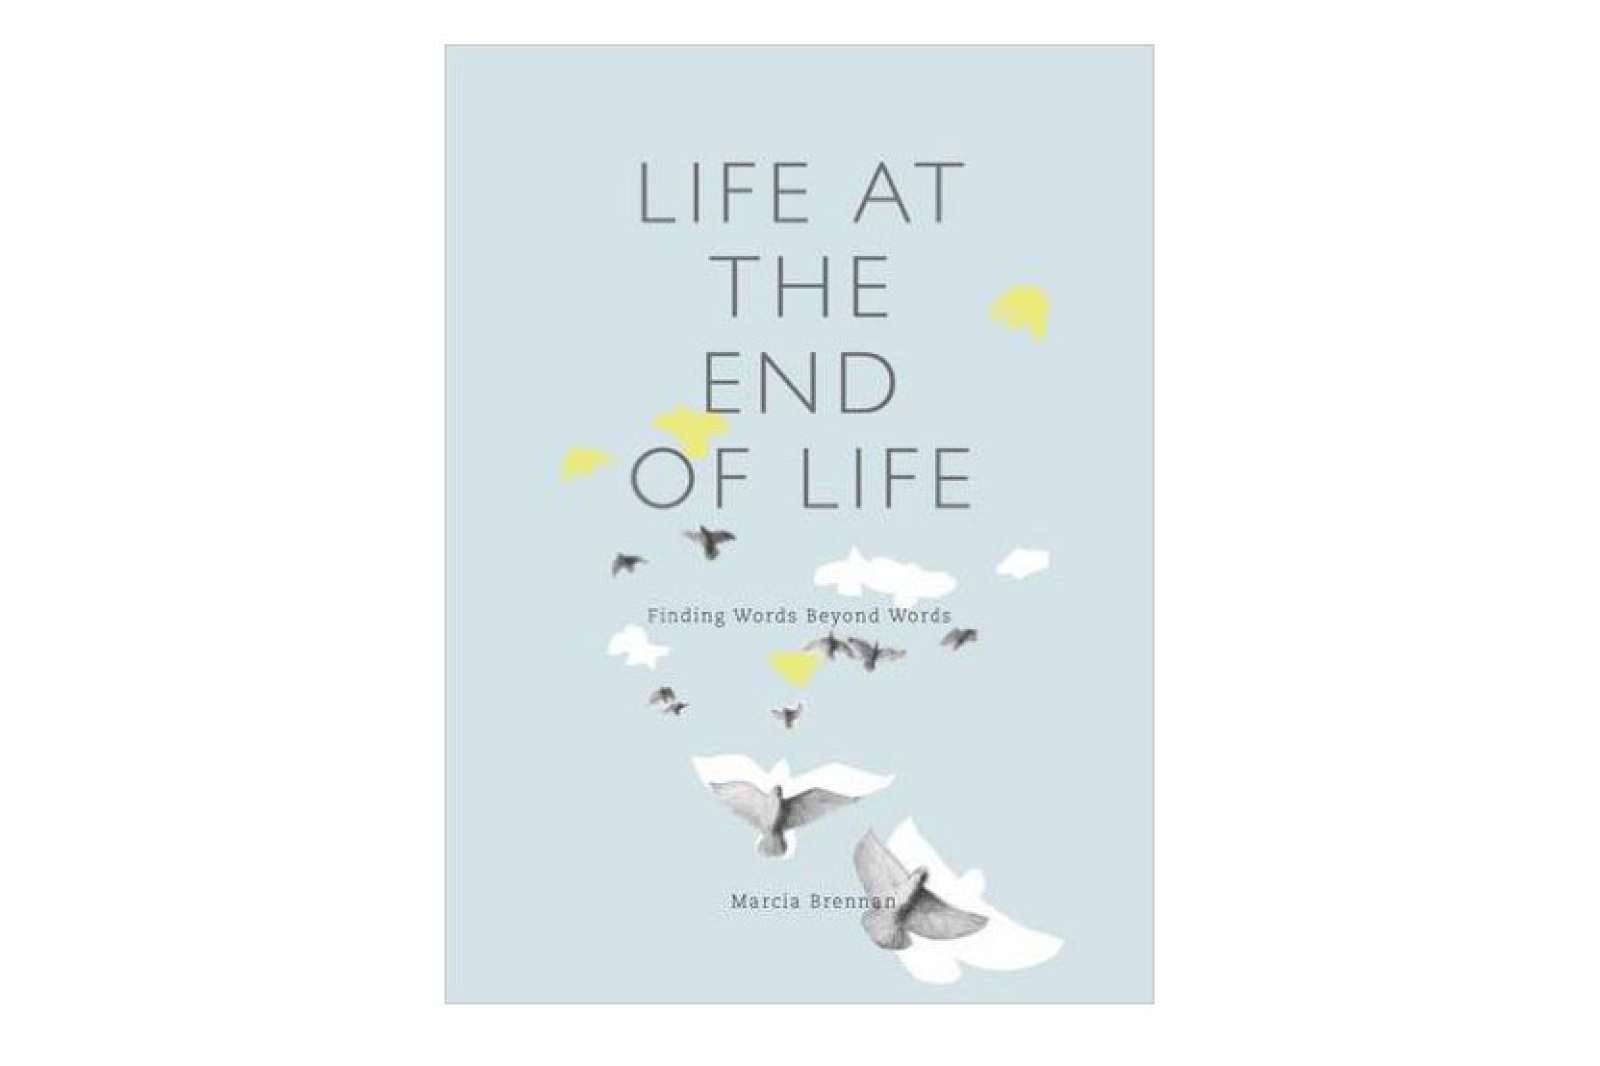 "Life at the End of Life" by Marcia Brennan